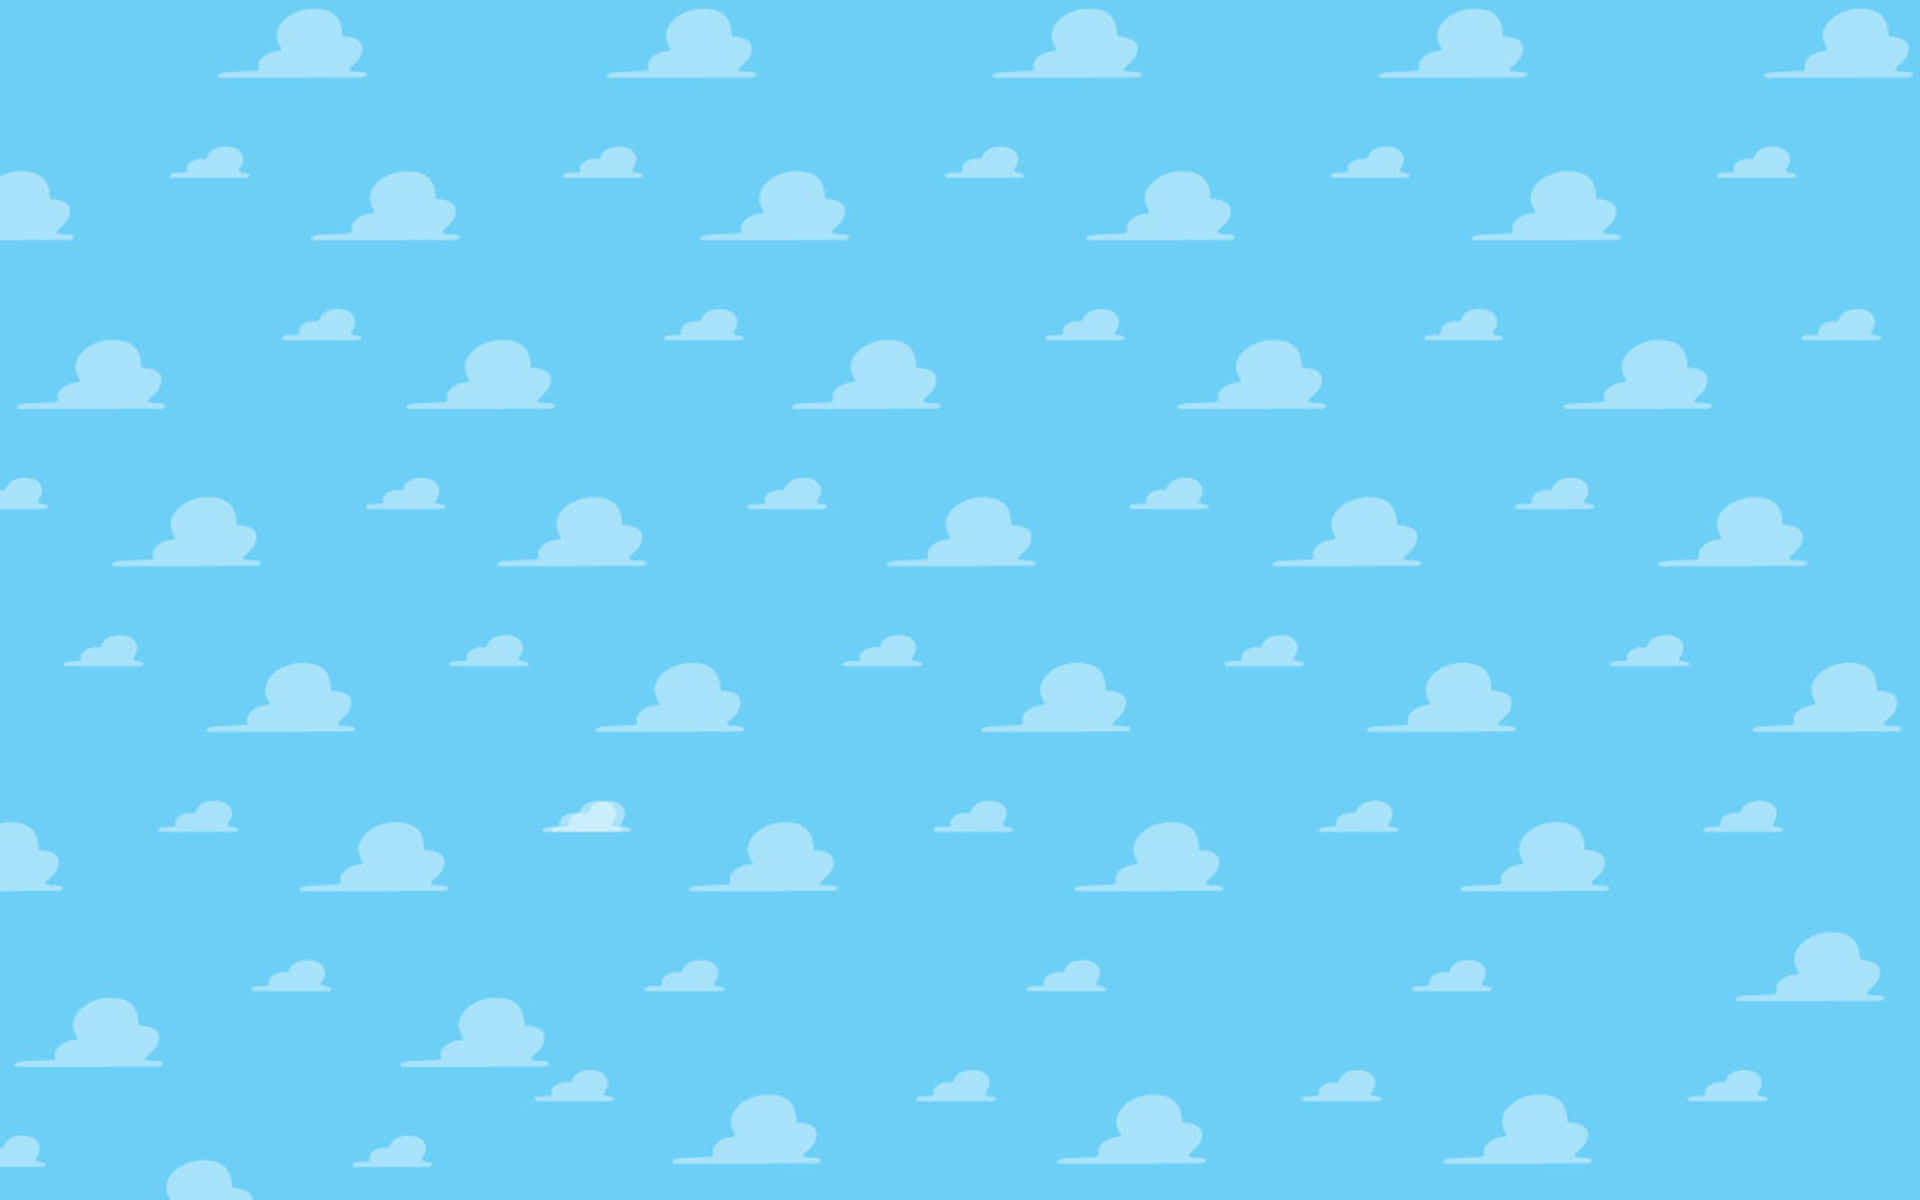 Toys Flying Across The Iconic Toy Story Cloud Background